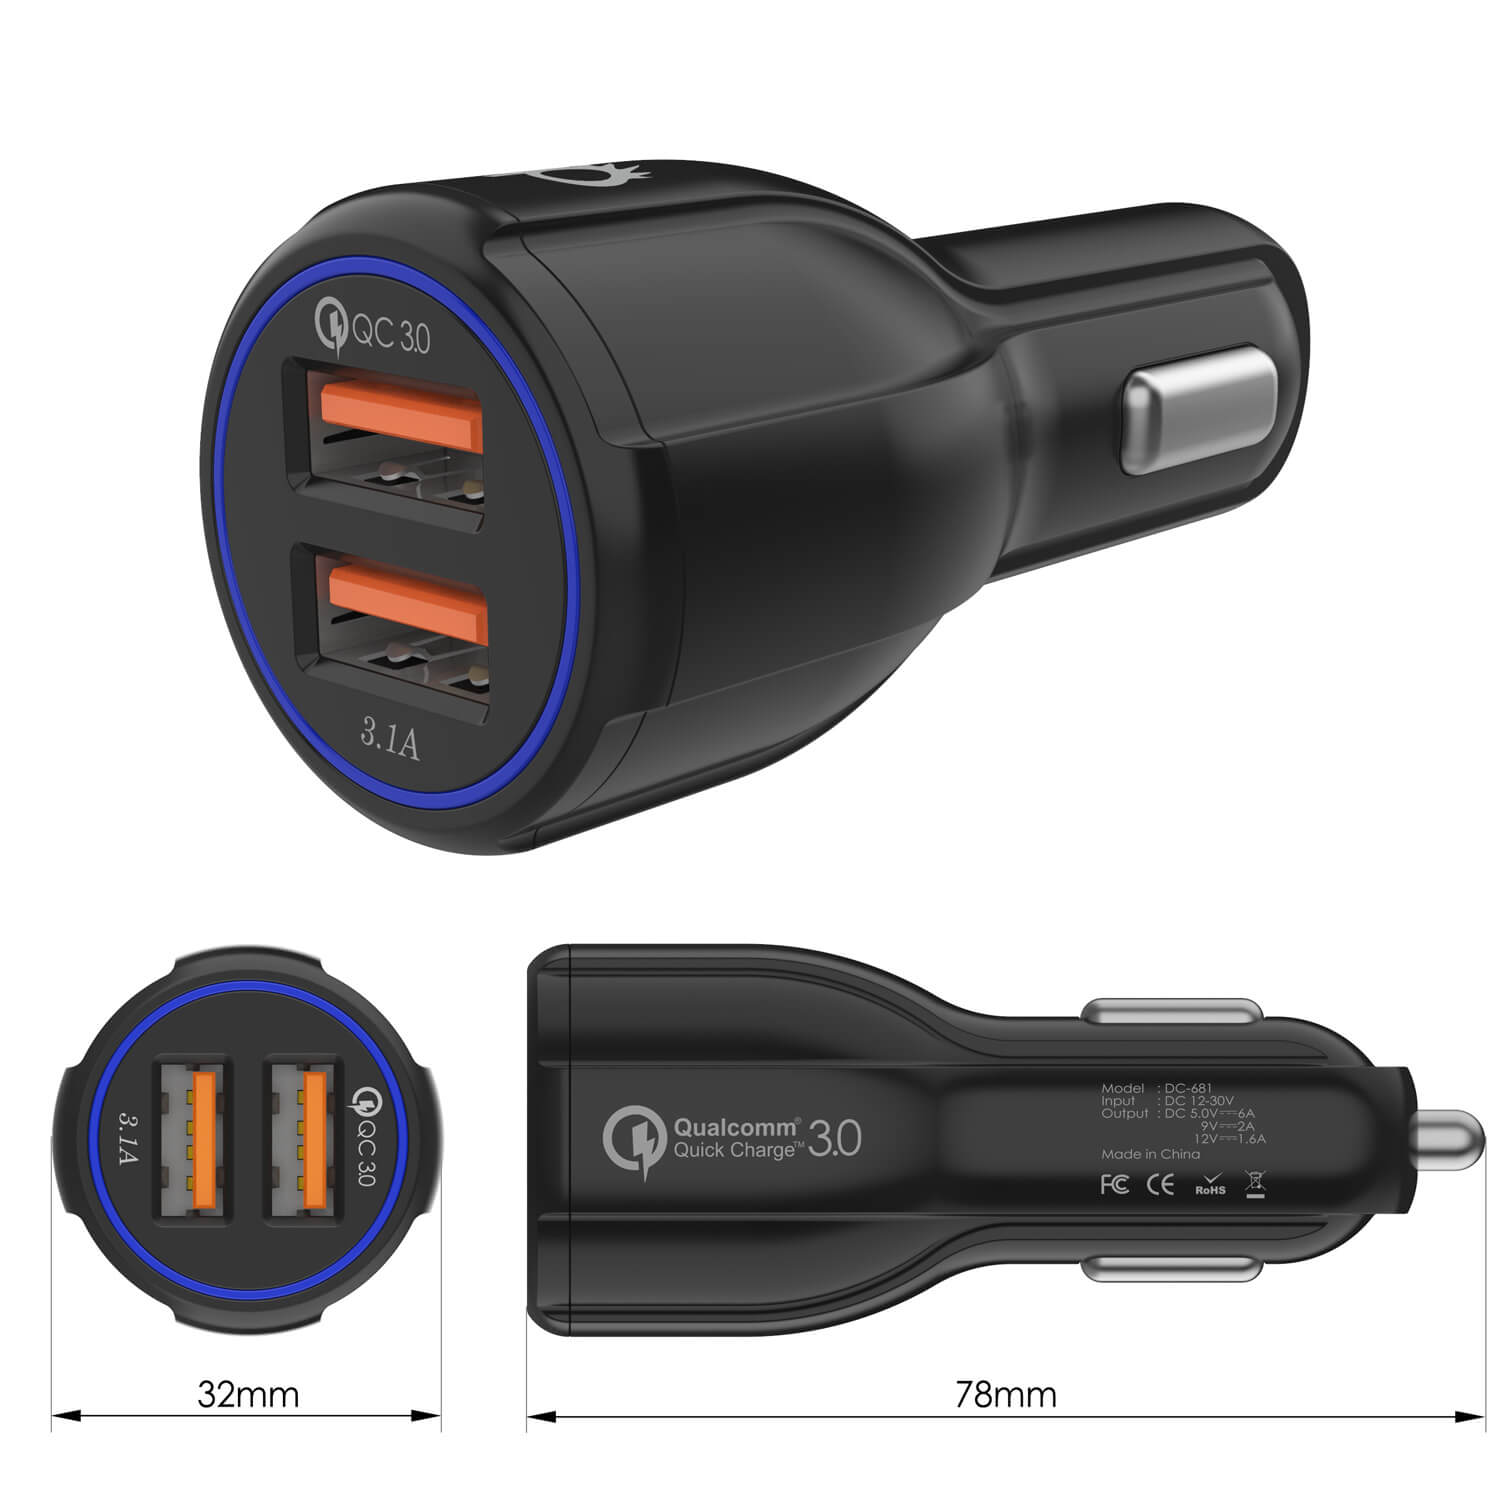 Ghostek® NRGcharge QuickCharge 2.0 Rapid High-speed Fast Wall Car Black Charger w/ Micro USB Cable